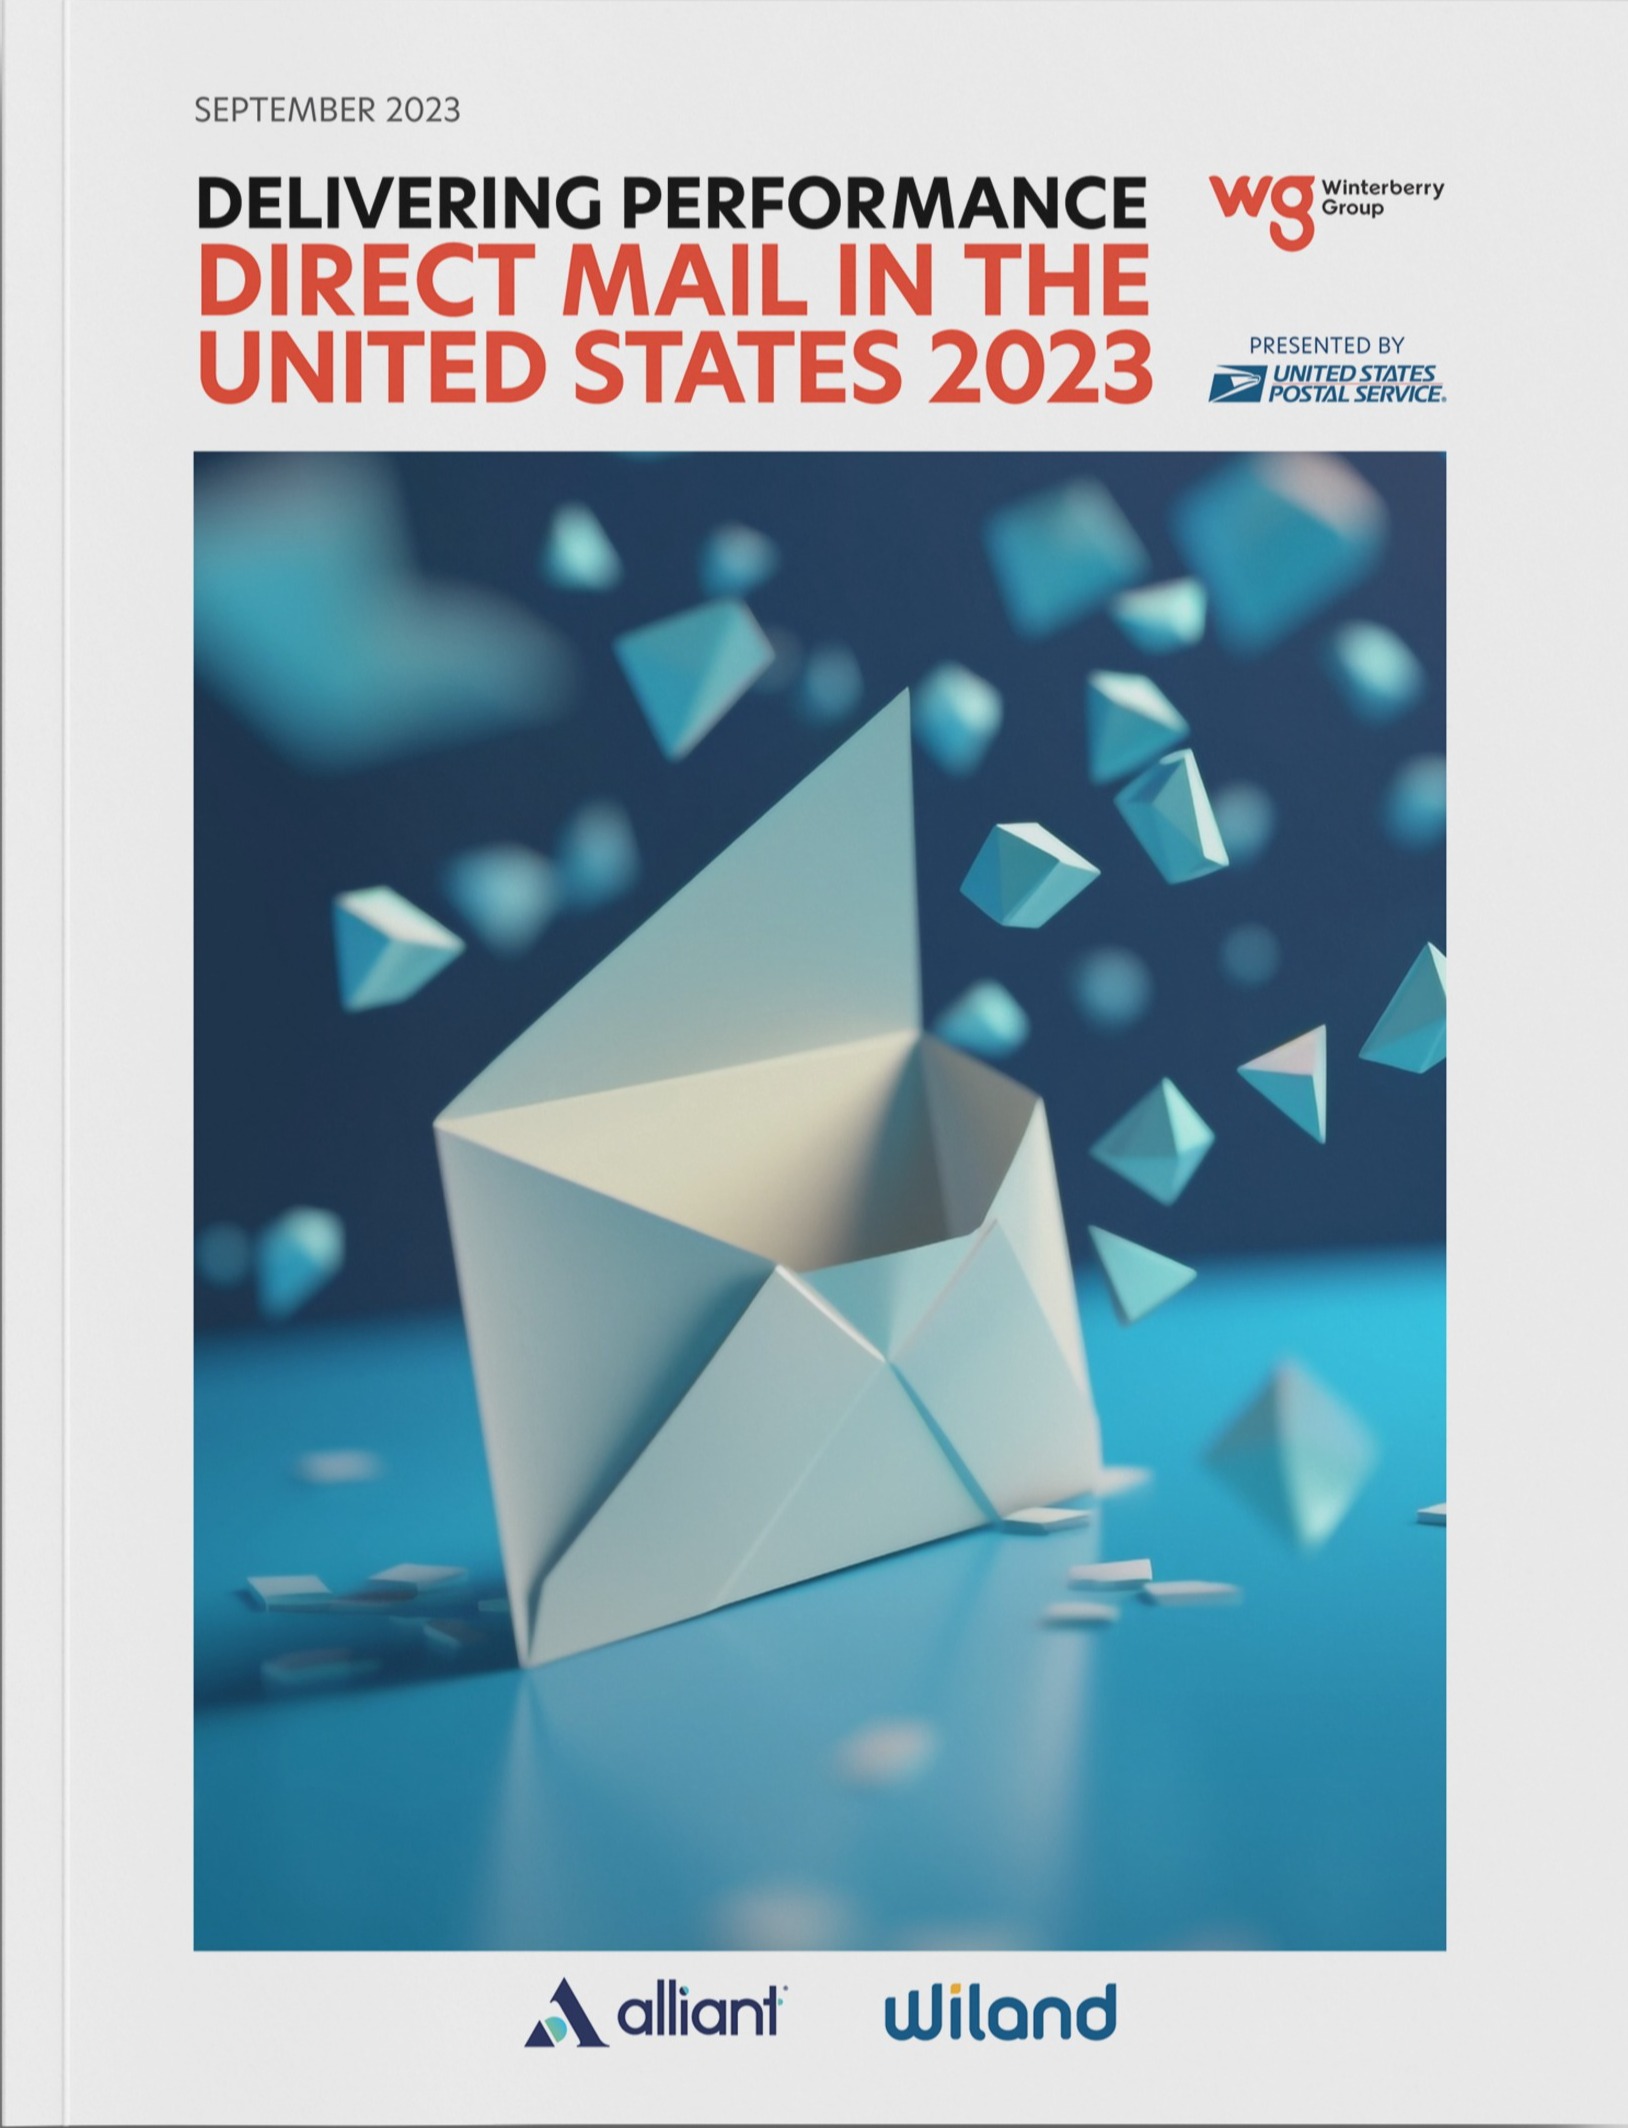 Delivering Performance: Direct Mail in the United States 2023